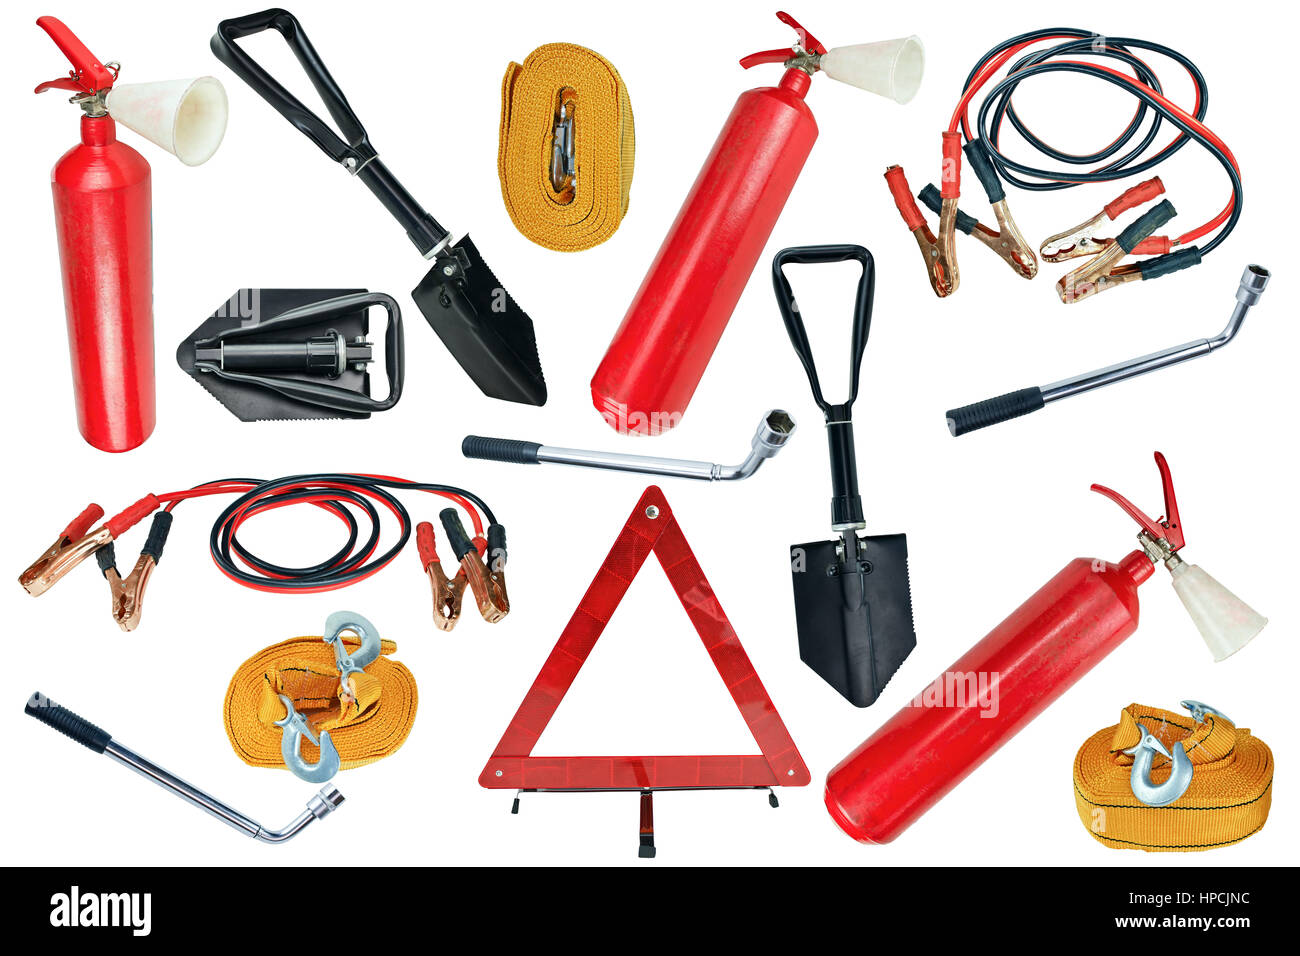 Elements of the essentials for a passenger car. Danger Safety Warning Triangle Sign, towing rope, fire extinguisher, Jumper cable, wheel wrench and sh Stock Photo